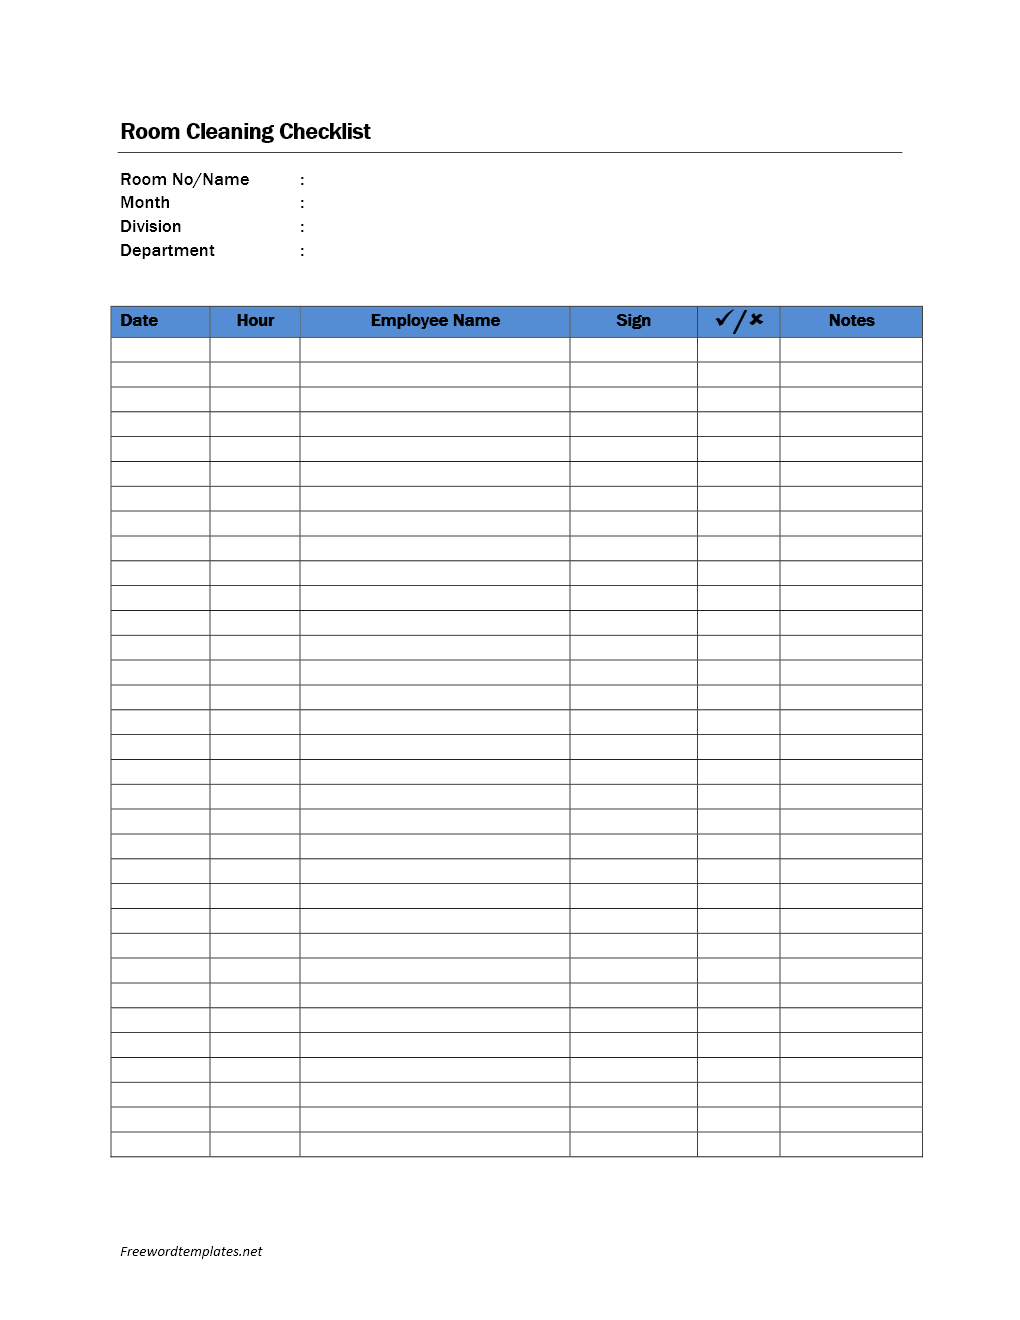 Room Cleaning Checklist Template